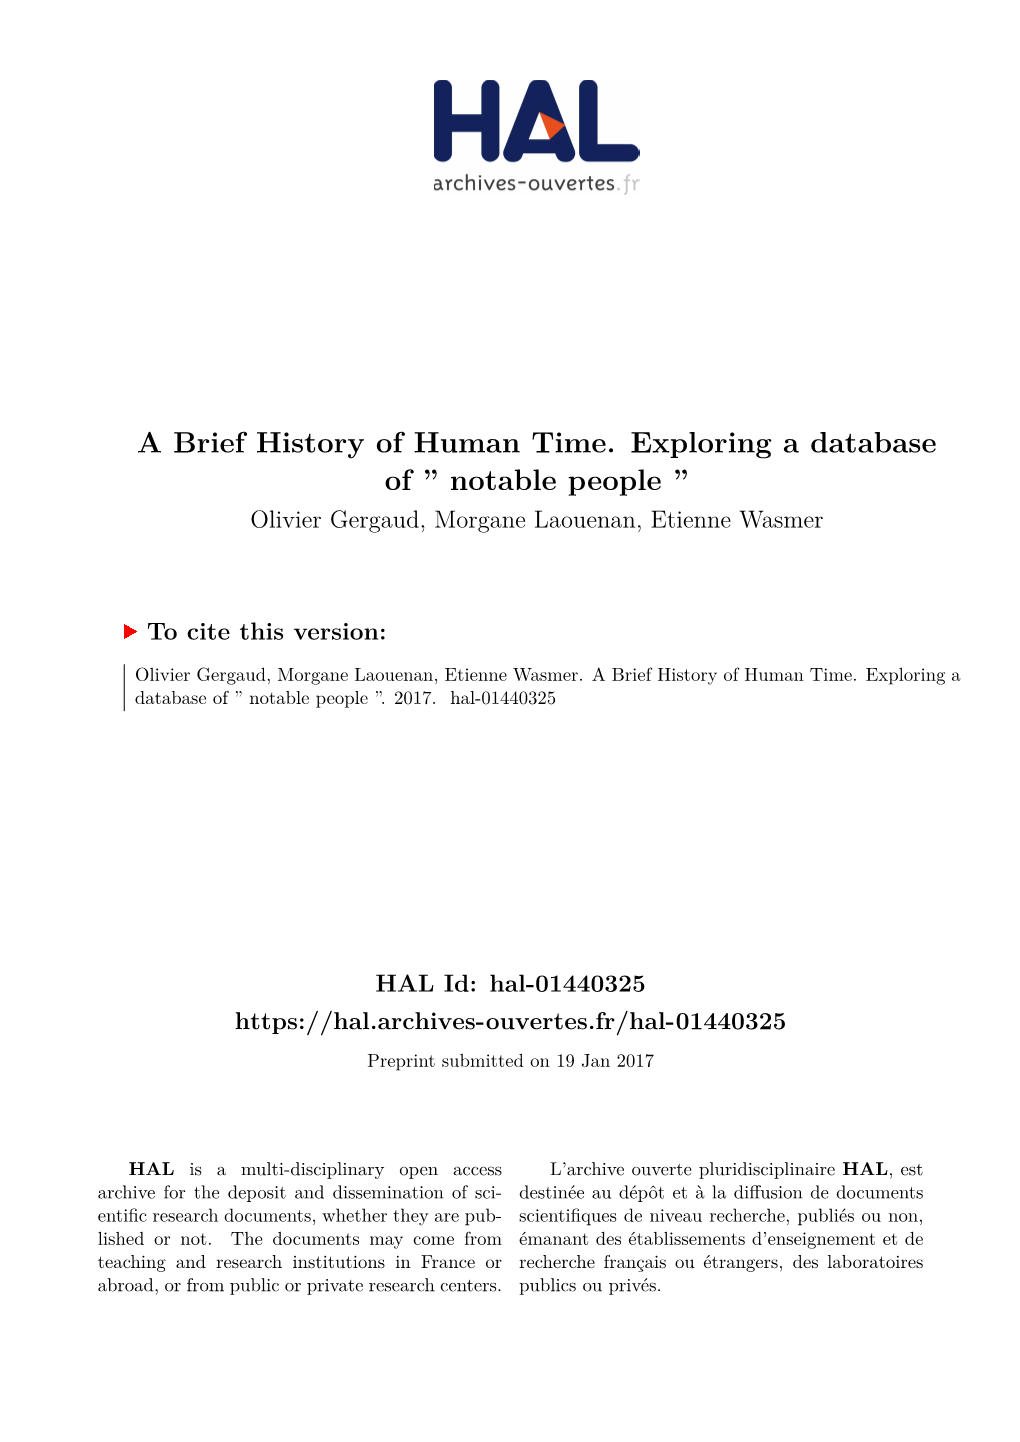 A Brief History of Human Time. Exploring a Database of ” Notable People ” Olivier Gergaud, Morgane Laouenan, Etienne Wasmer